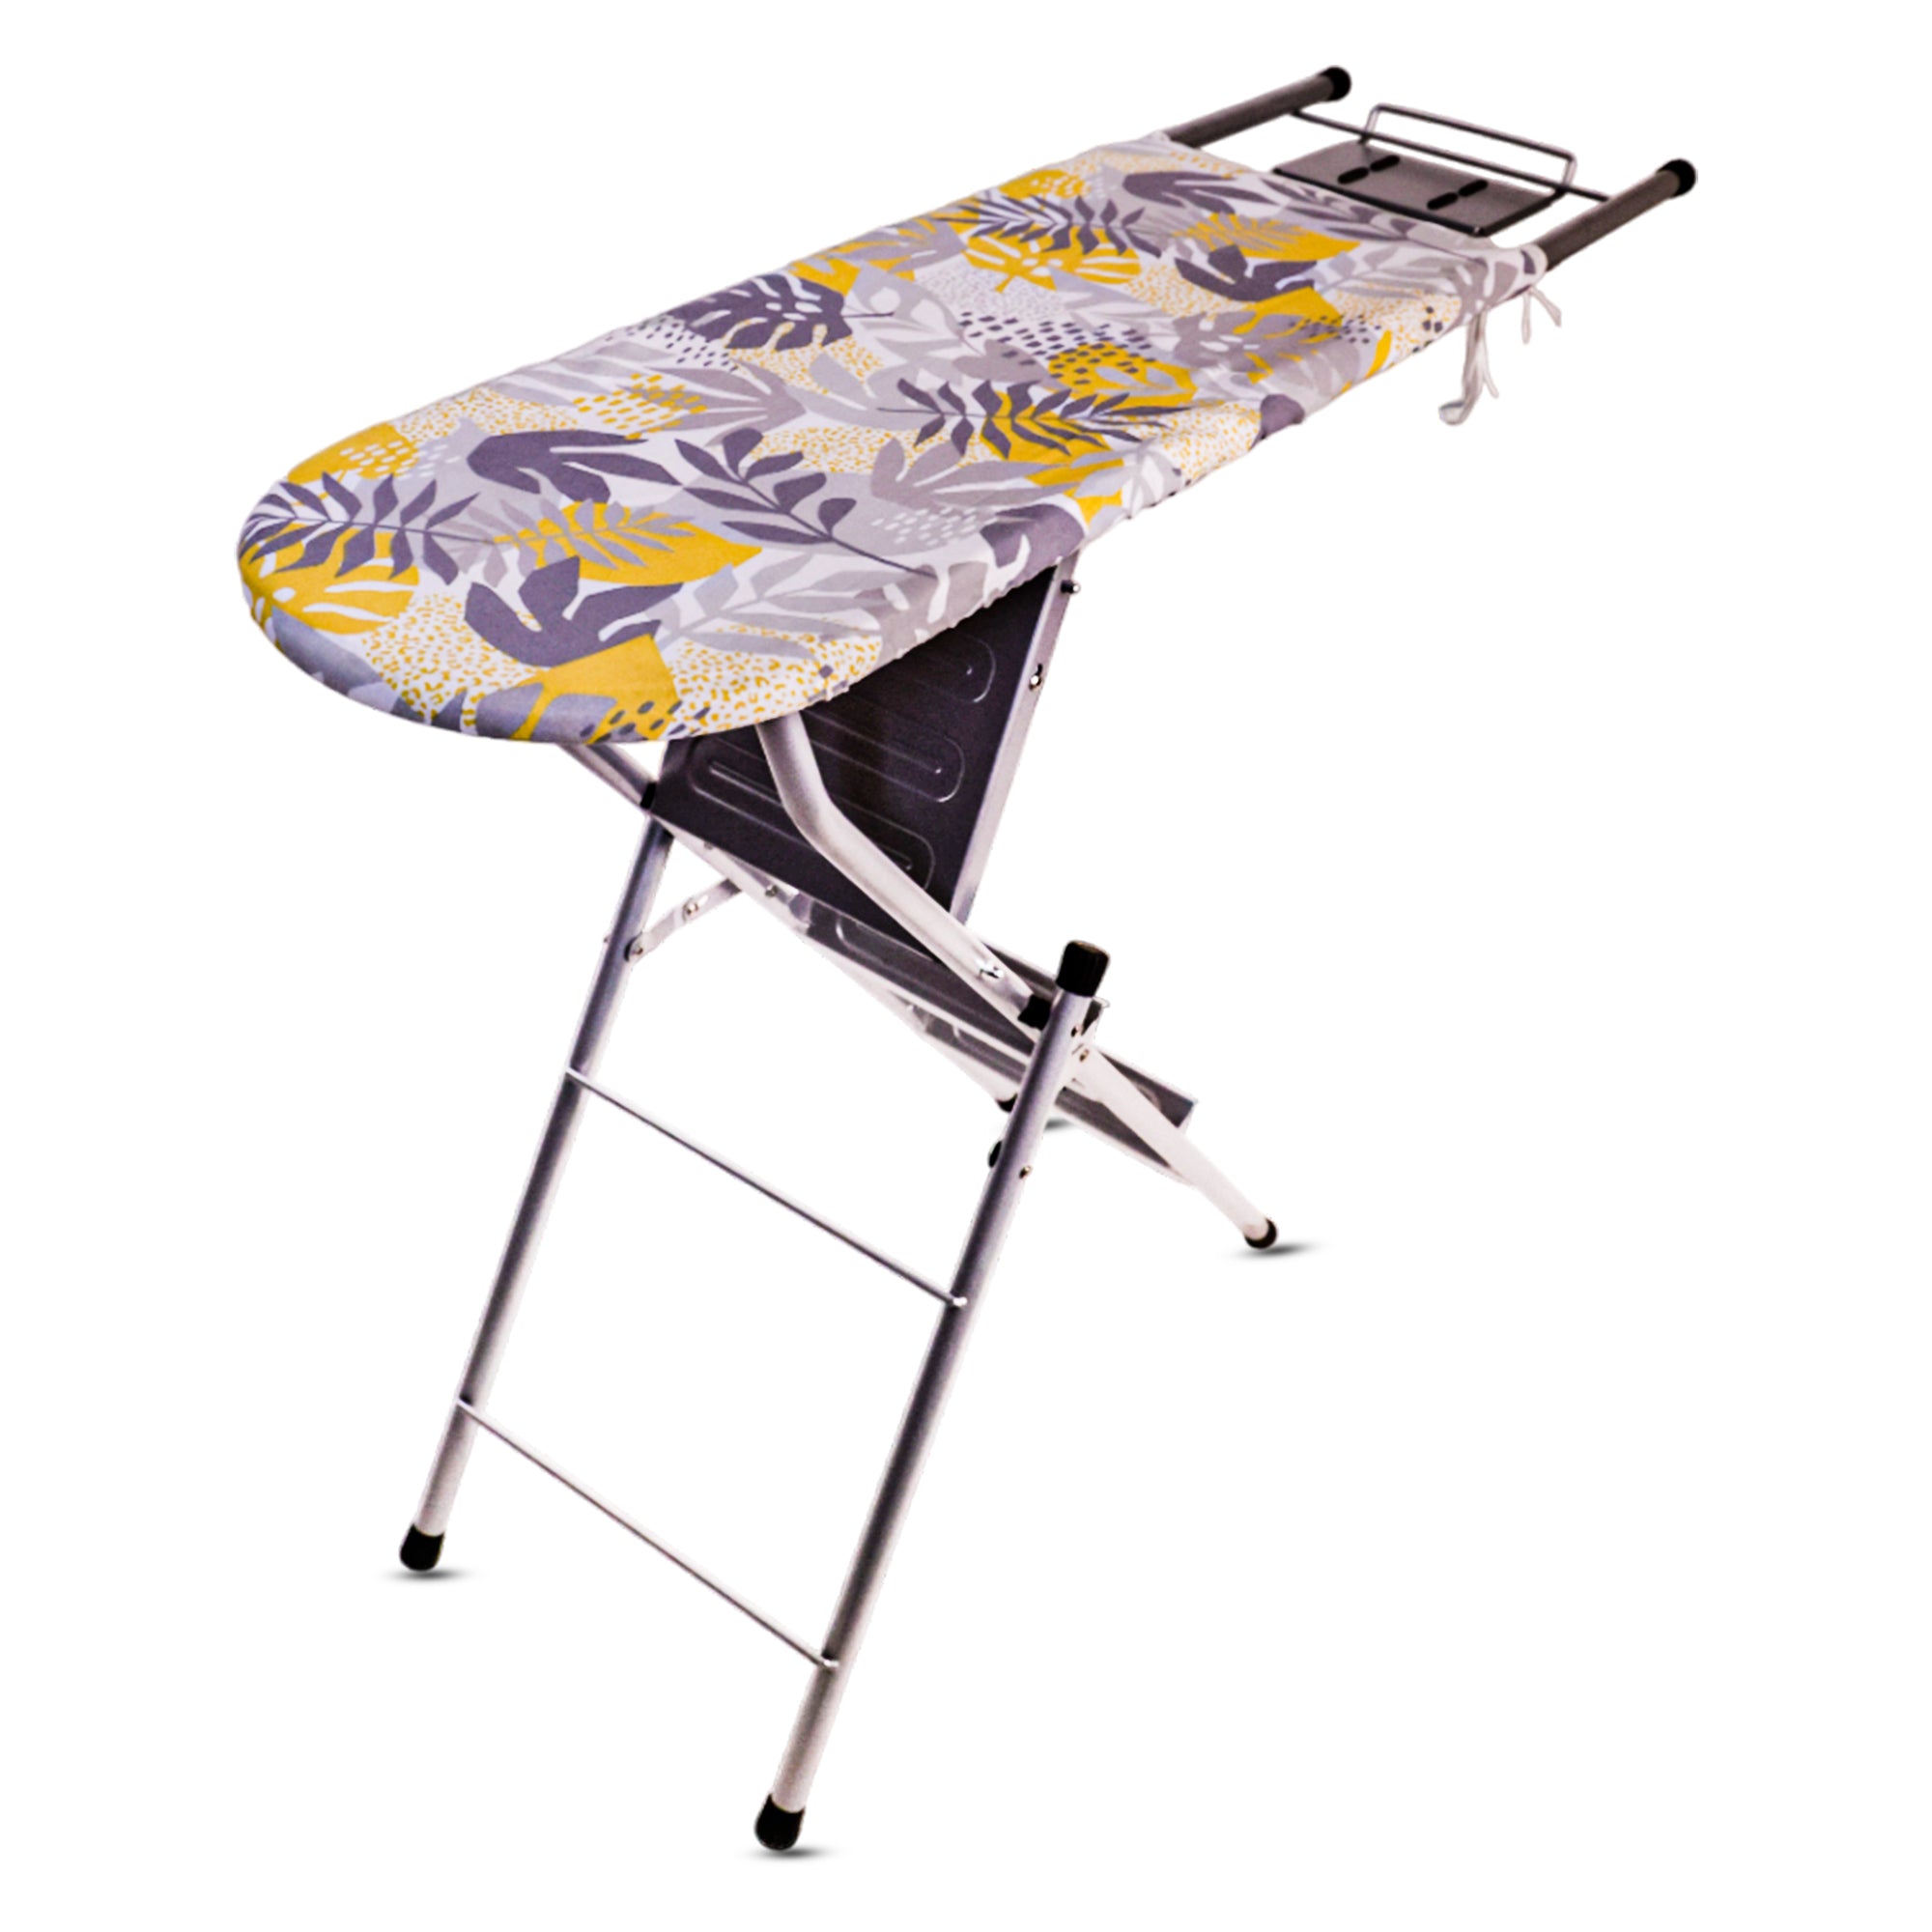 MultiComfort Ironing Board |  Ironing Board with Step Ladder (Floral)